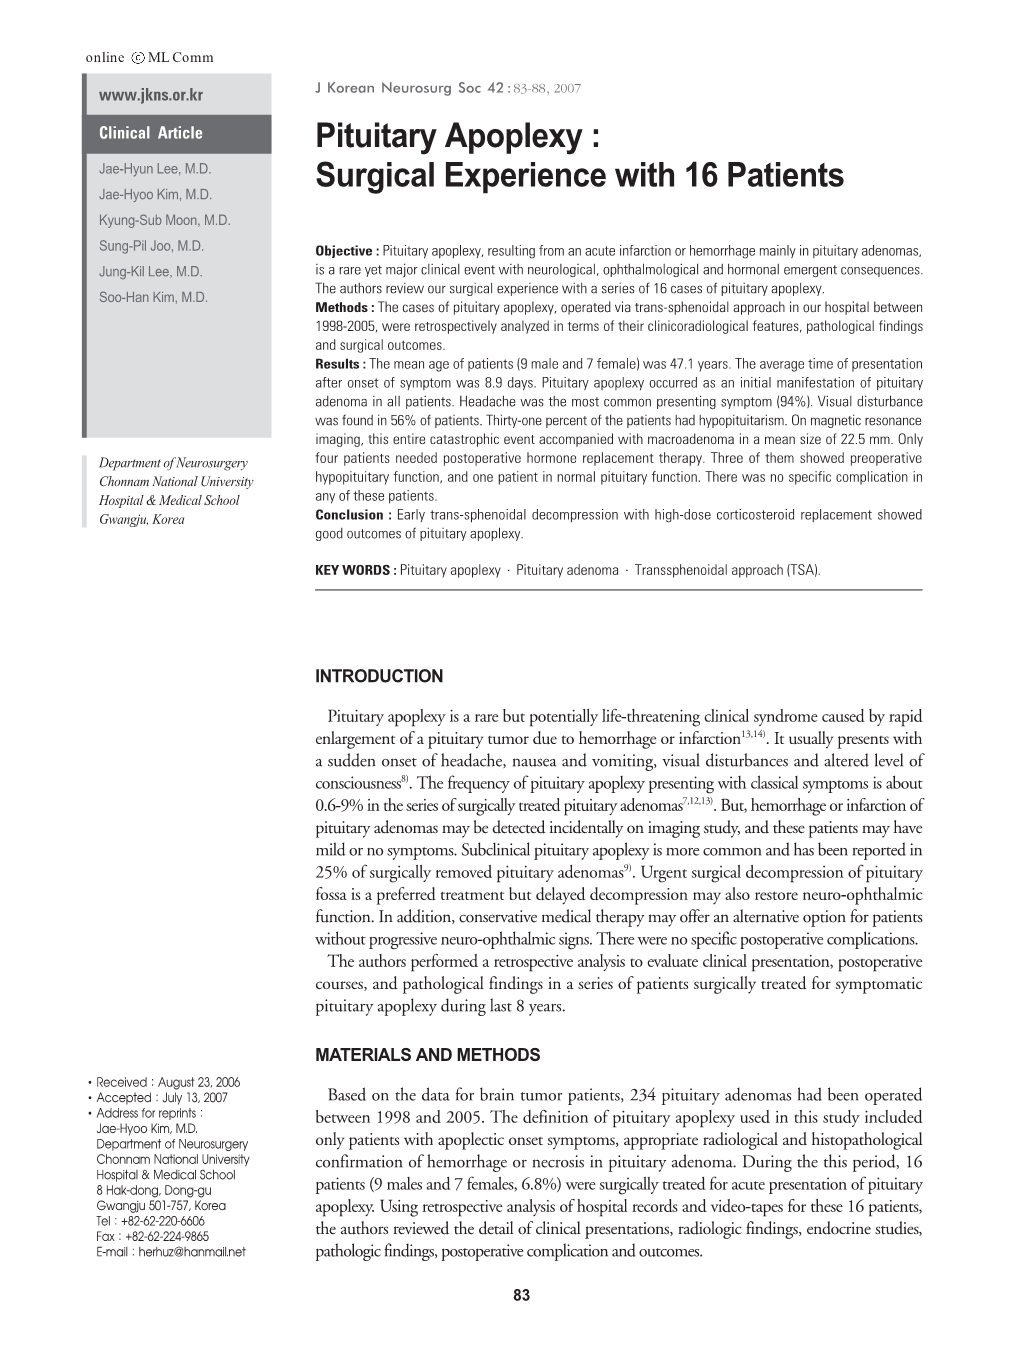 Pituitary Apoplexy : Surgical Experience with 16 Patients